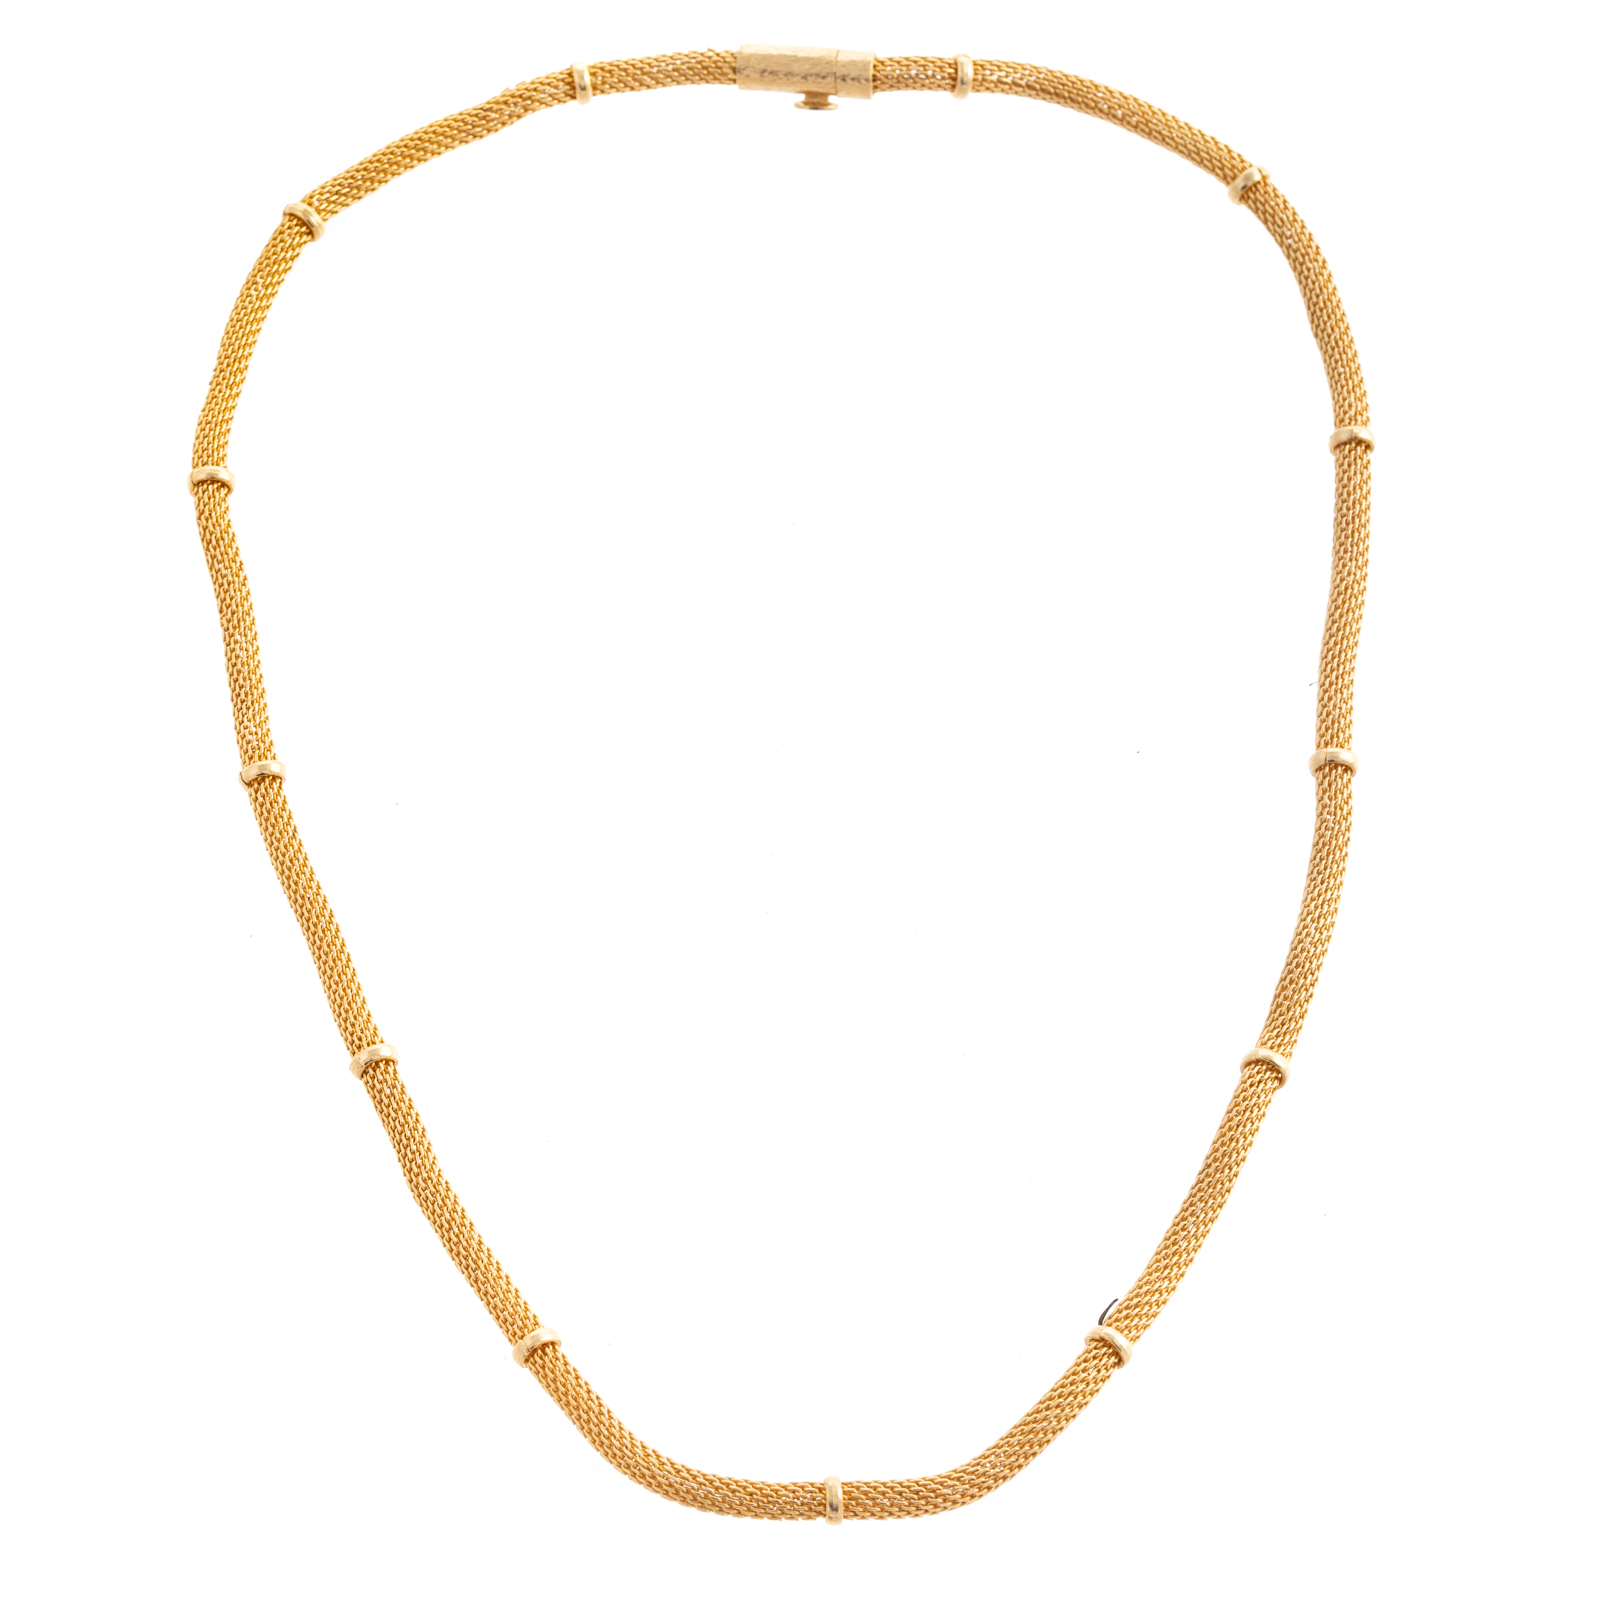 A FLEXIBLE MESH LINK NECKLACE IN